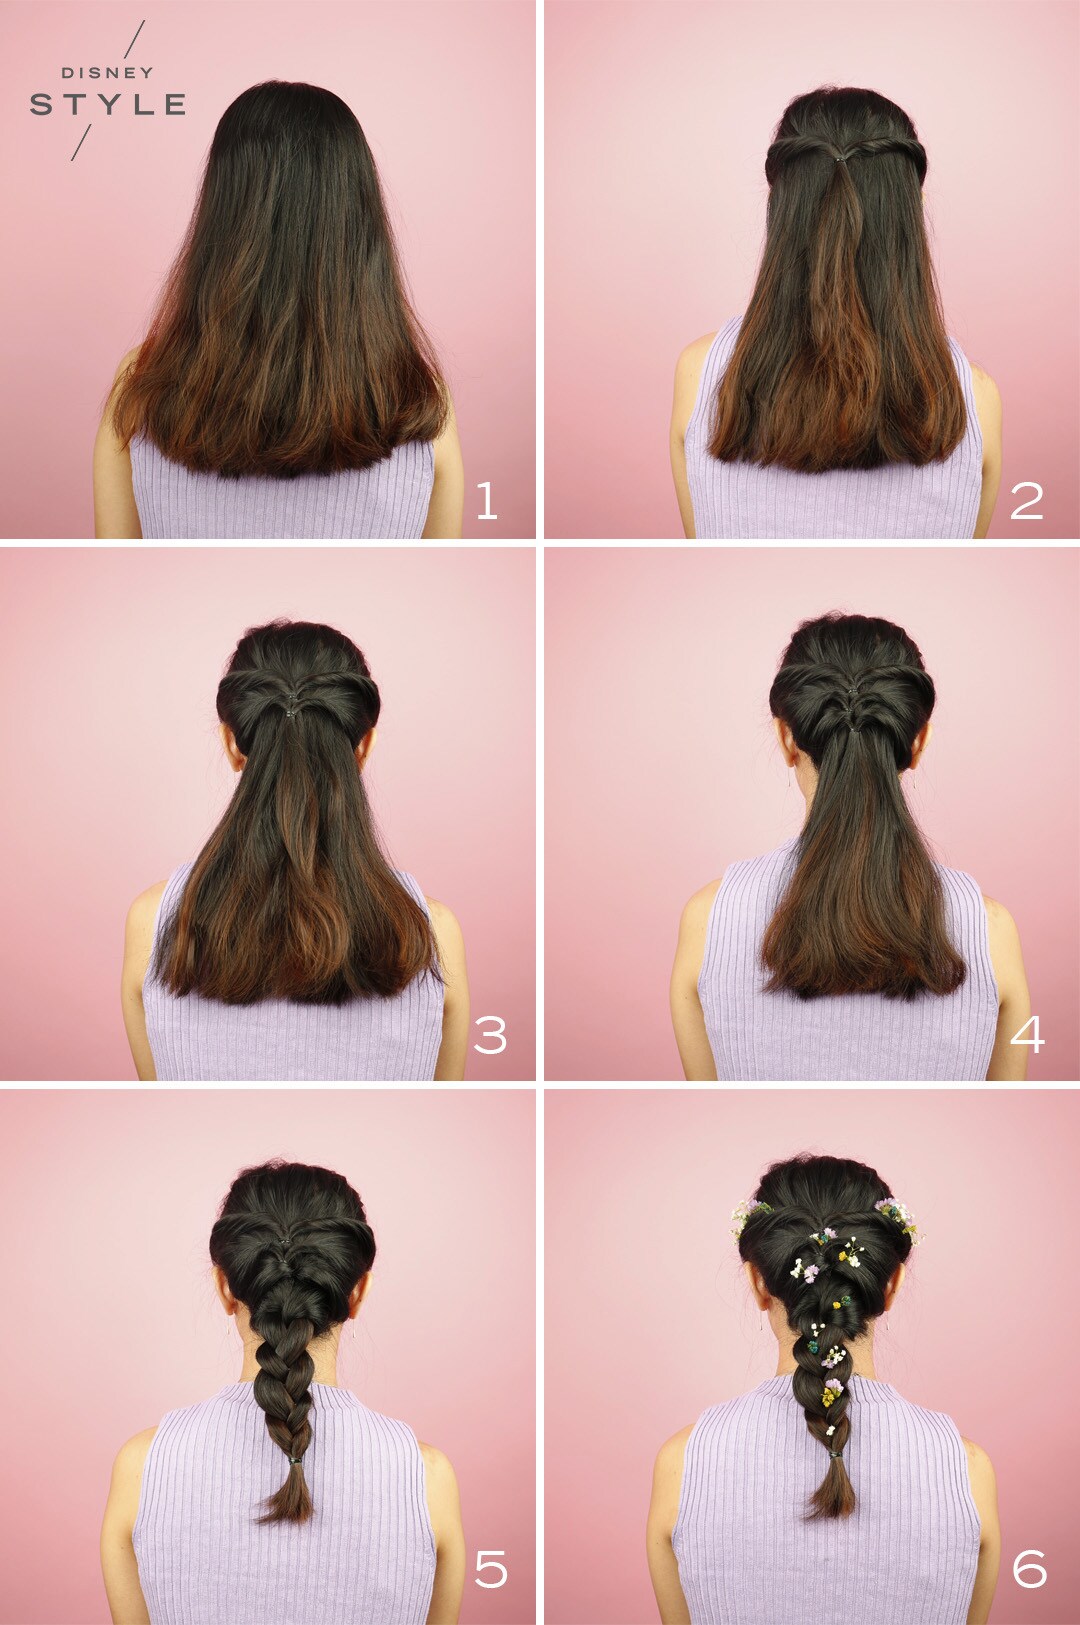 4 Hair Styles Inspired By Disney Princesses  Be Beautiful India